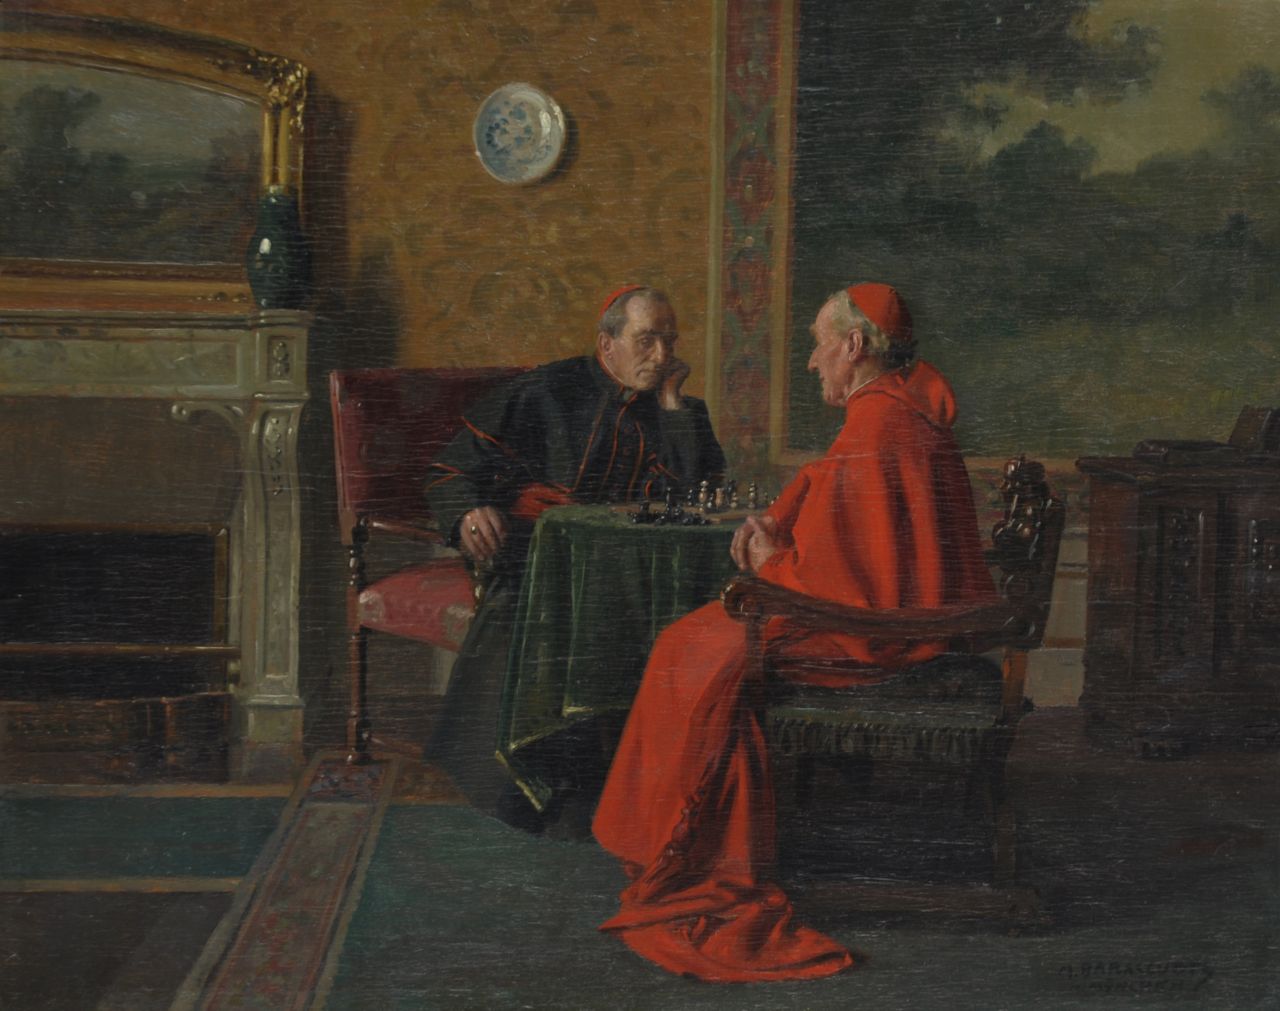 Barascudts M.  | Max Barascudts, Chess playing cardinals, oil on panel 40.0 x 50.0 cm, signed l.r.